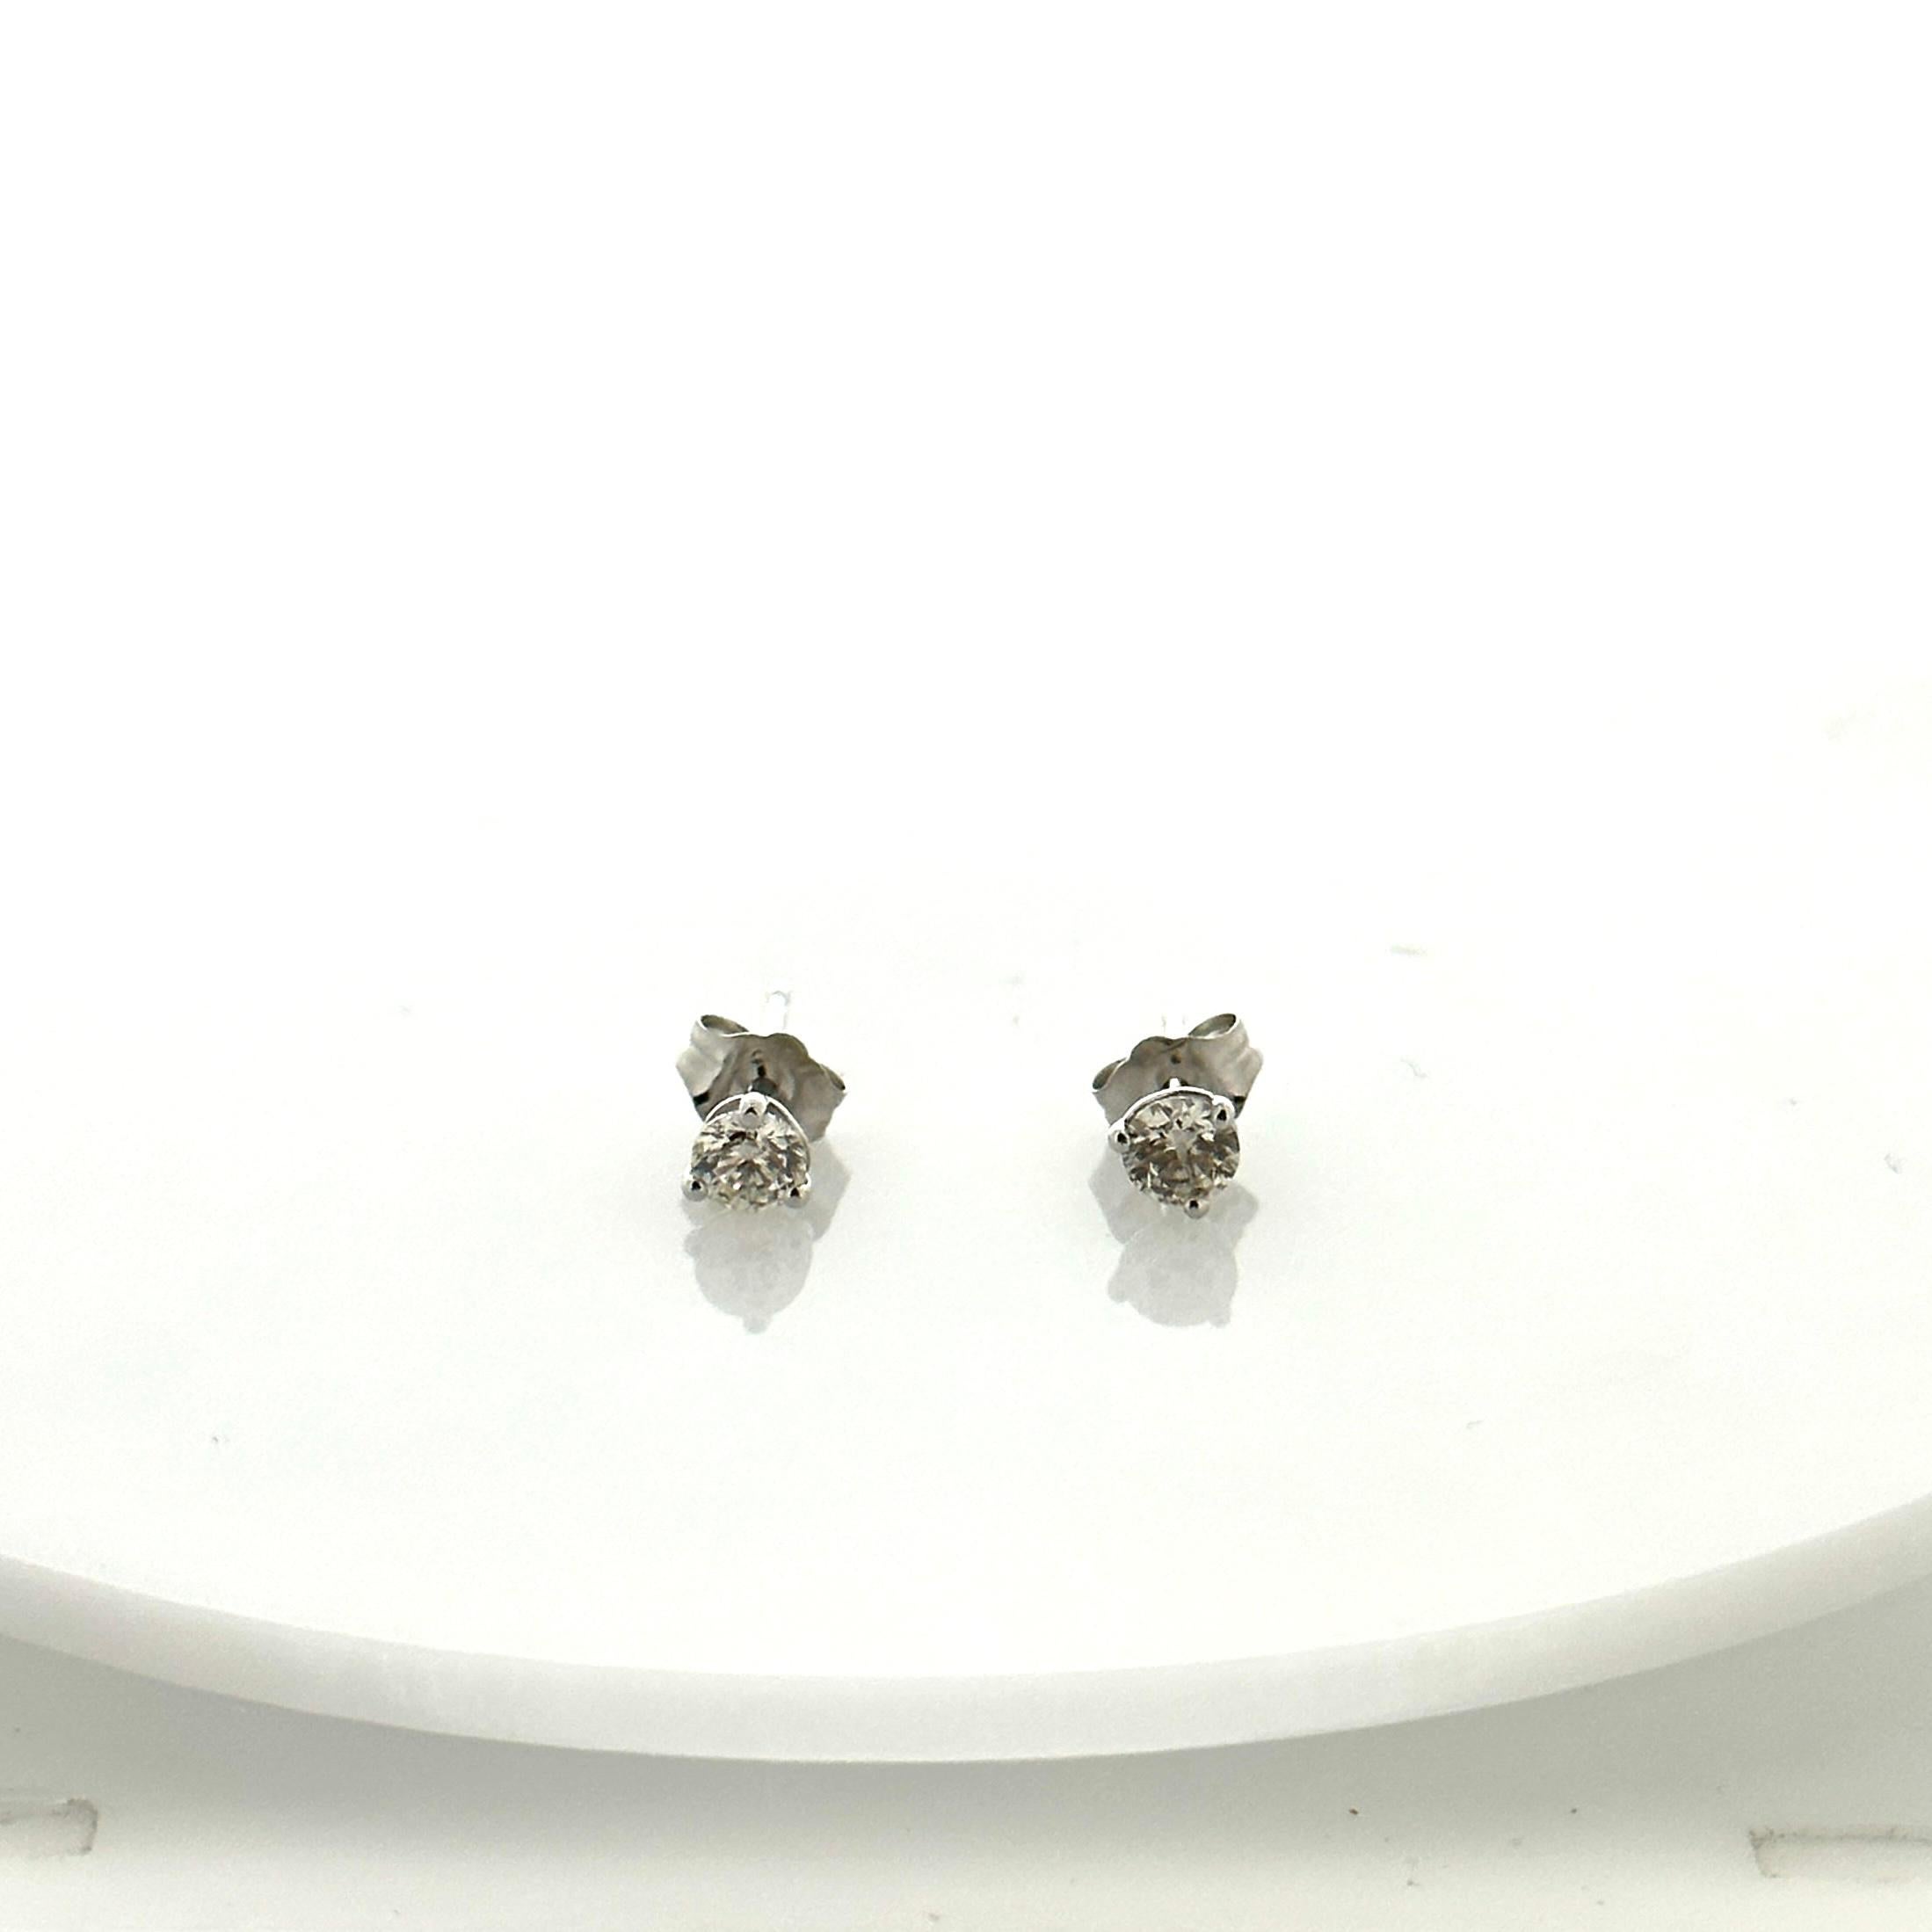 Stunning 14 Karat white gold handmade earrings featuring 2 round brilliant cut diamonds weighing 0.50 carat total I-J color and SI1 clarity. These gorgeous earrings are classic and timelessly elegant.